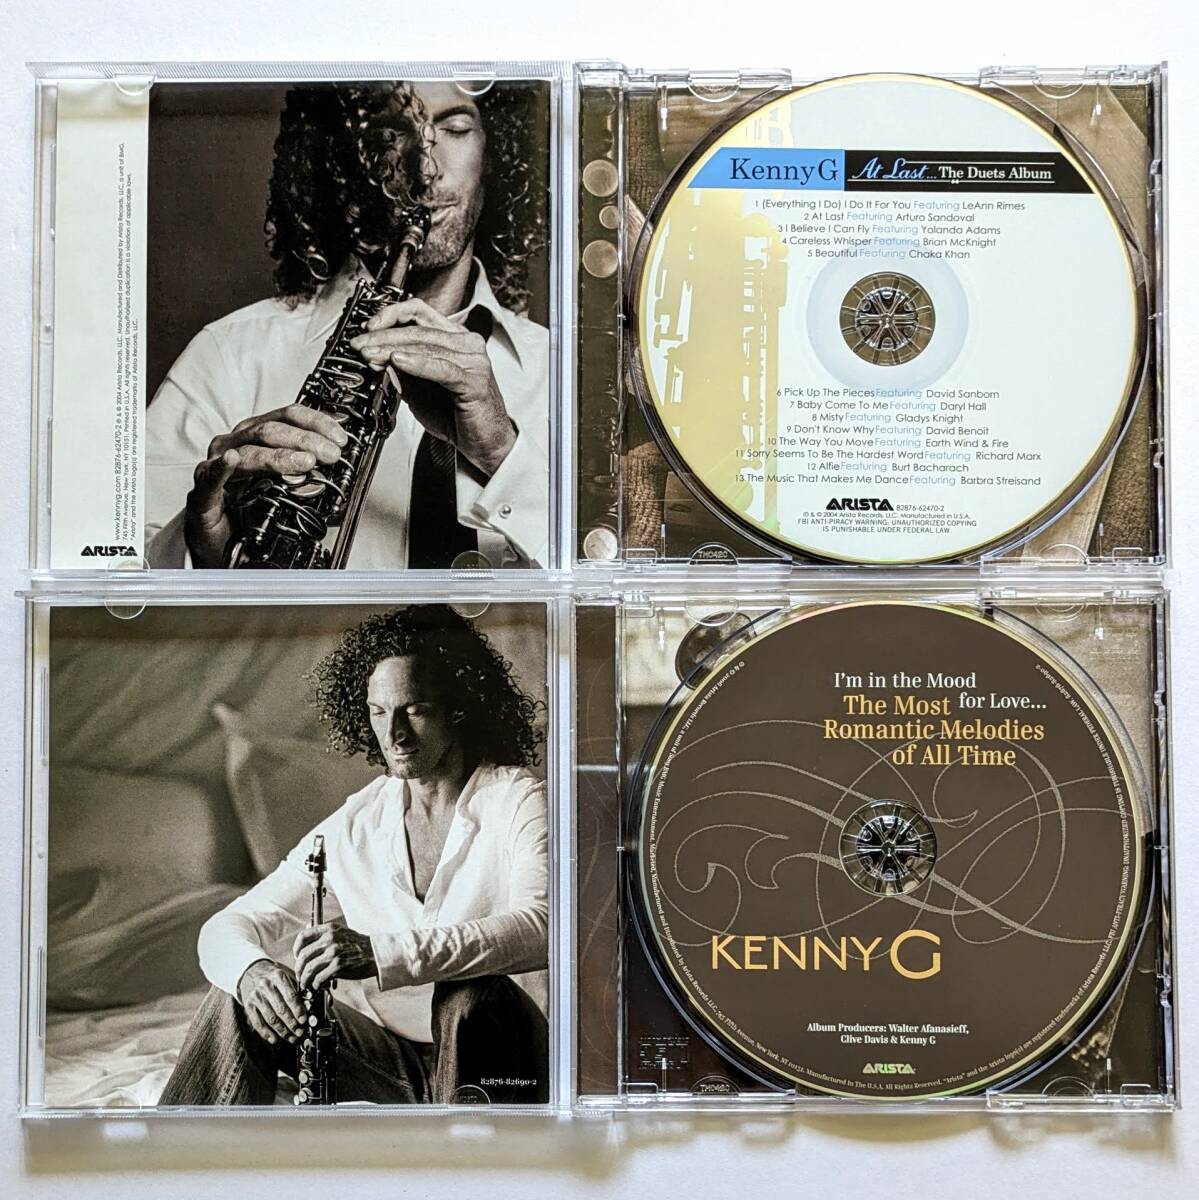 KENNY G ケニー・G 5枚セット/CLASSICS IN THE KEY OF G/GREATEST HITS/Songbird/At Last...The Duets Album/I'm in the Mood for Love..._画像8